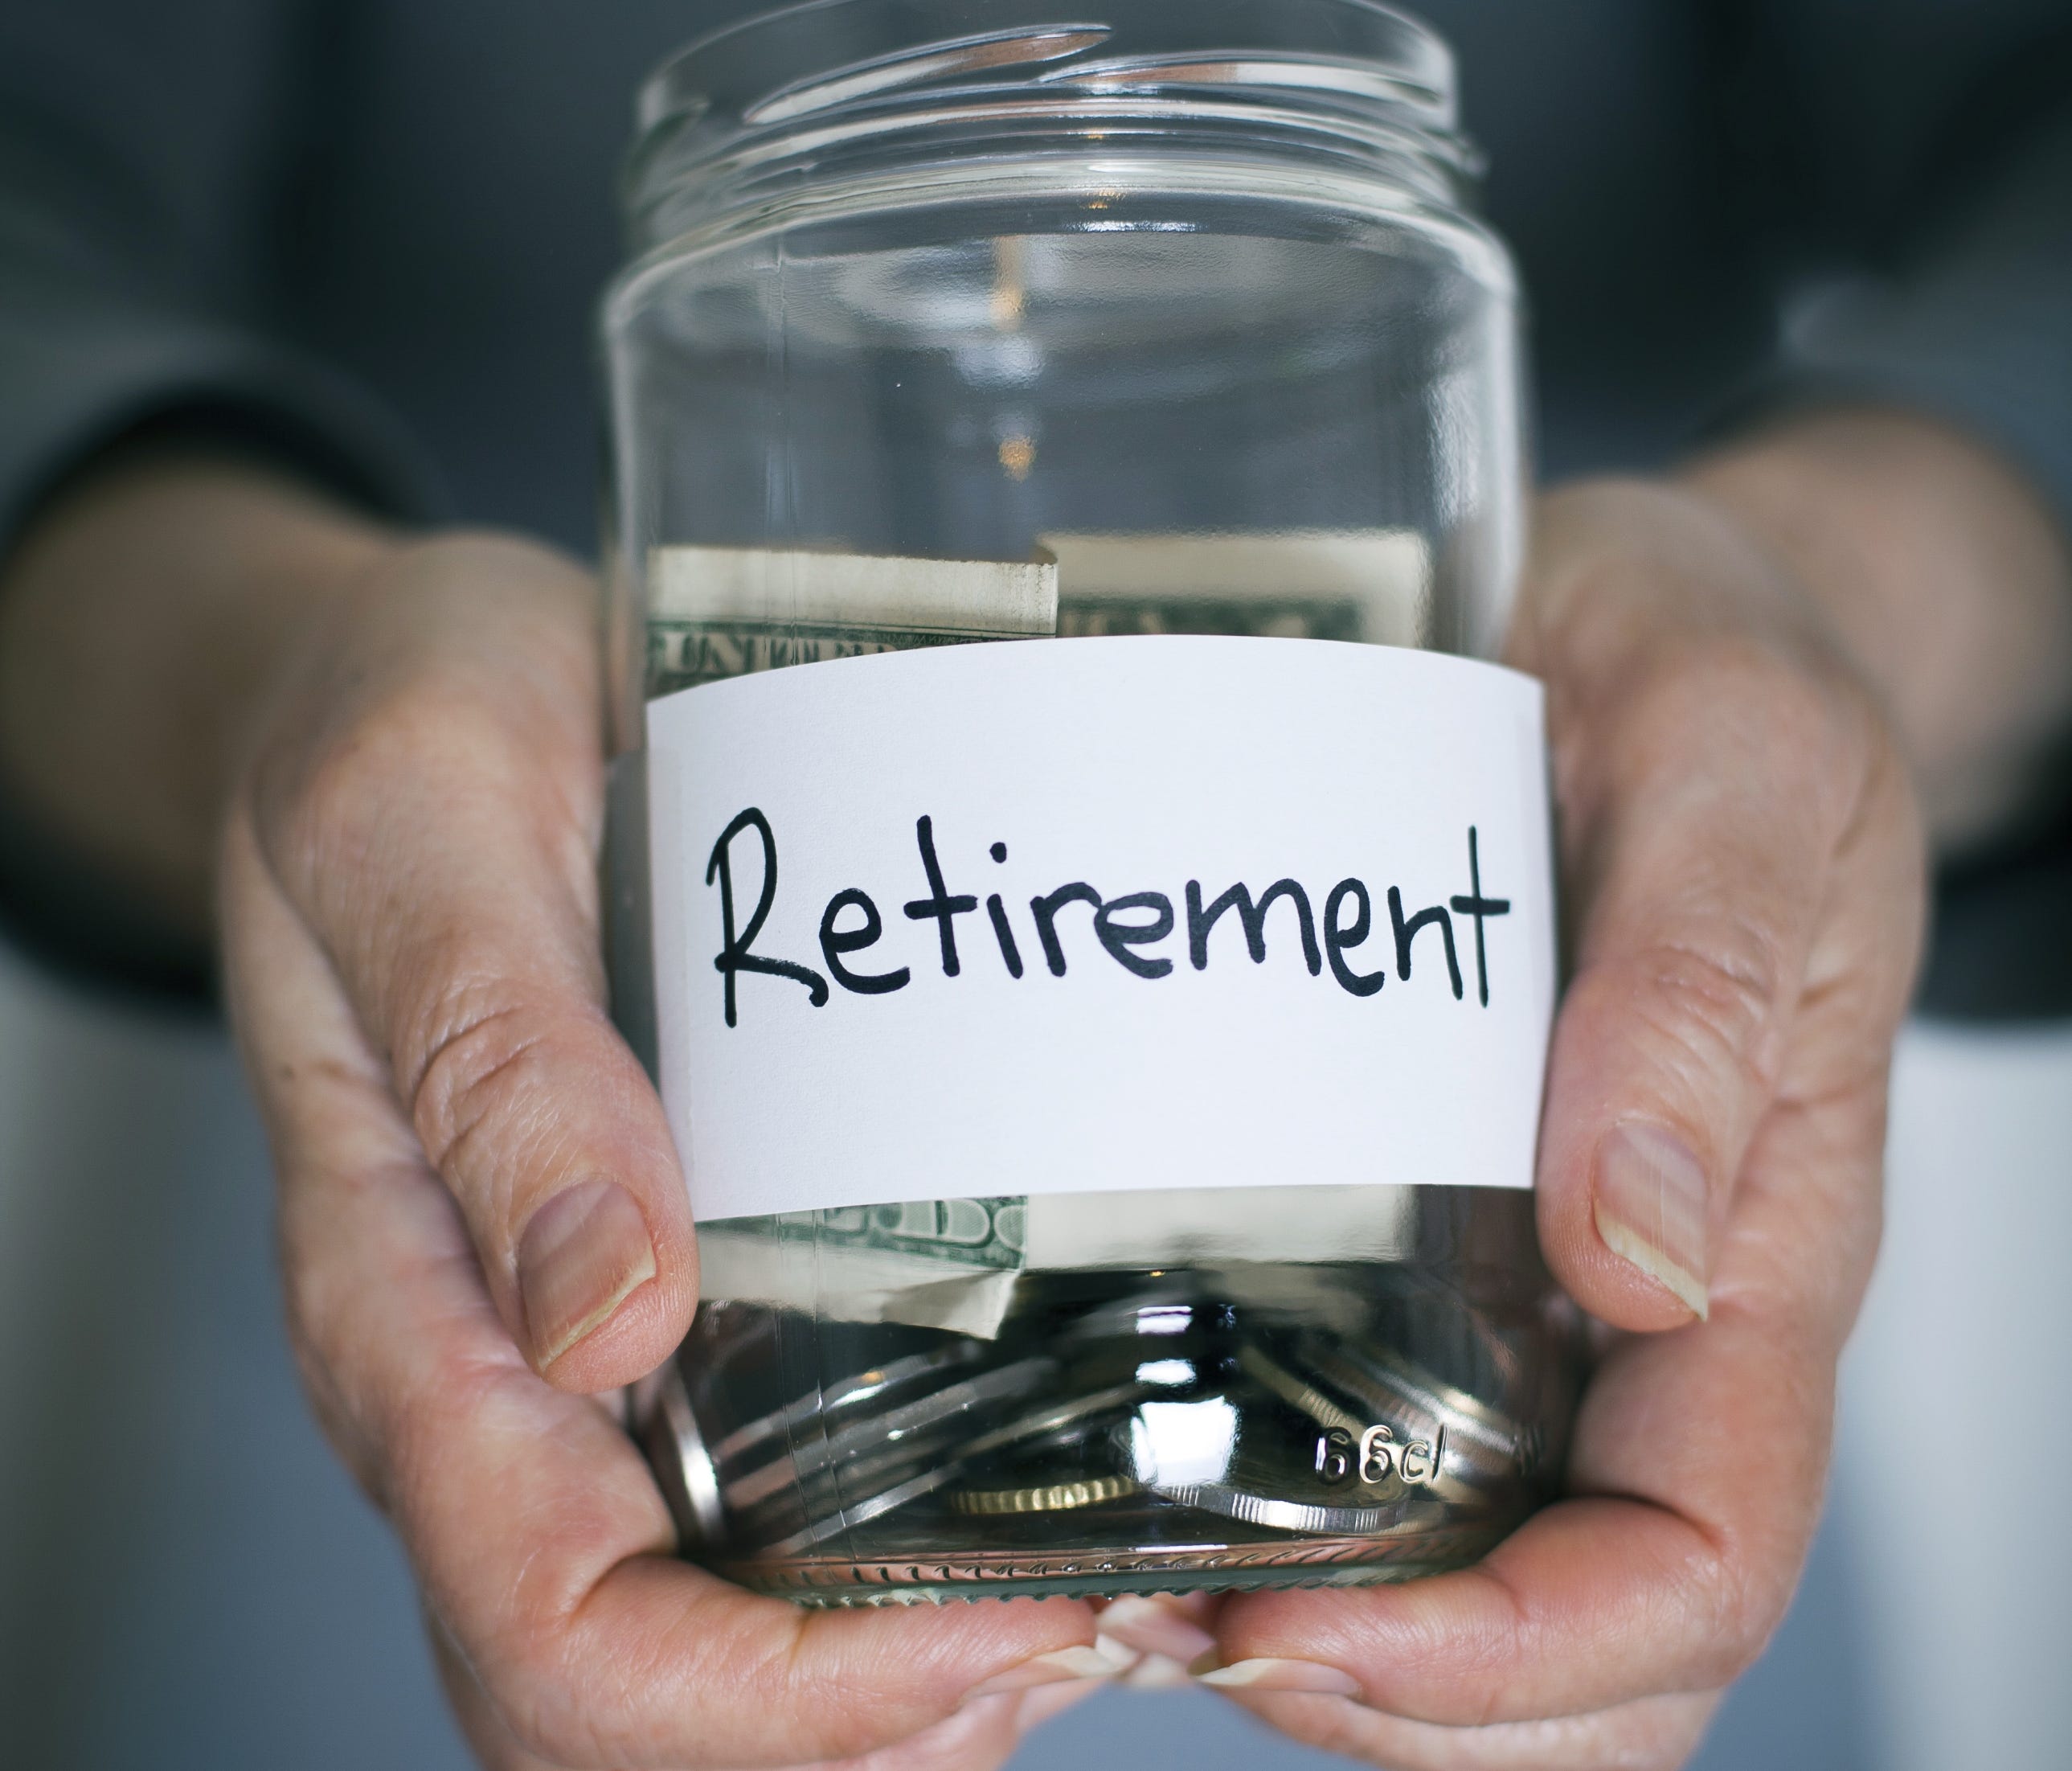 Photo illustration created in 2014 shows retirement savings in a glass jar.